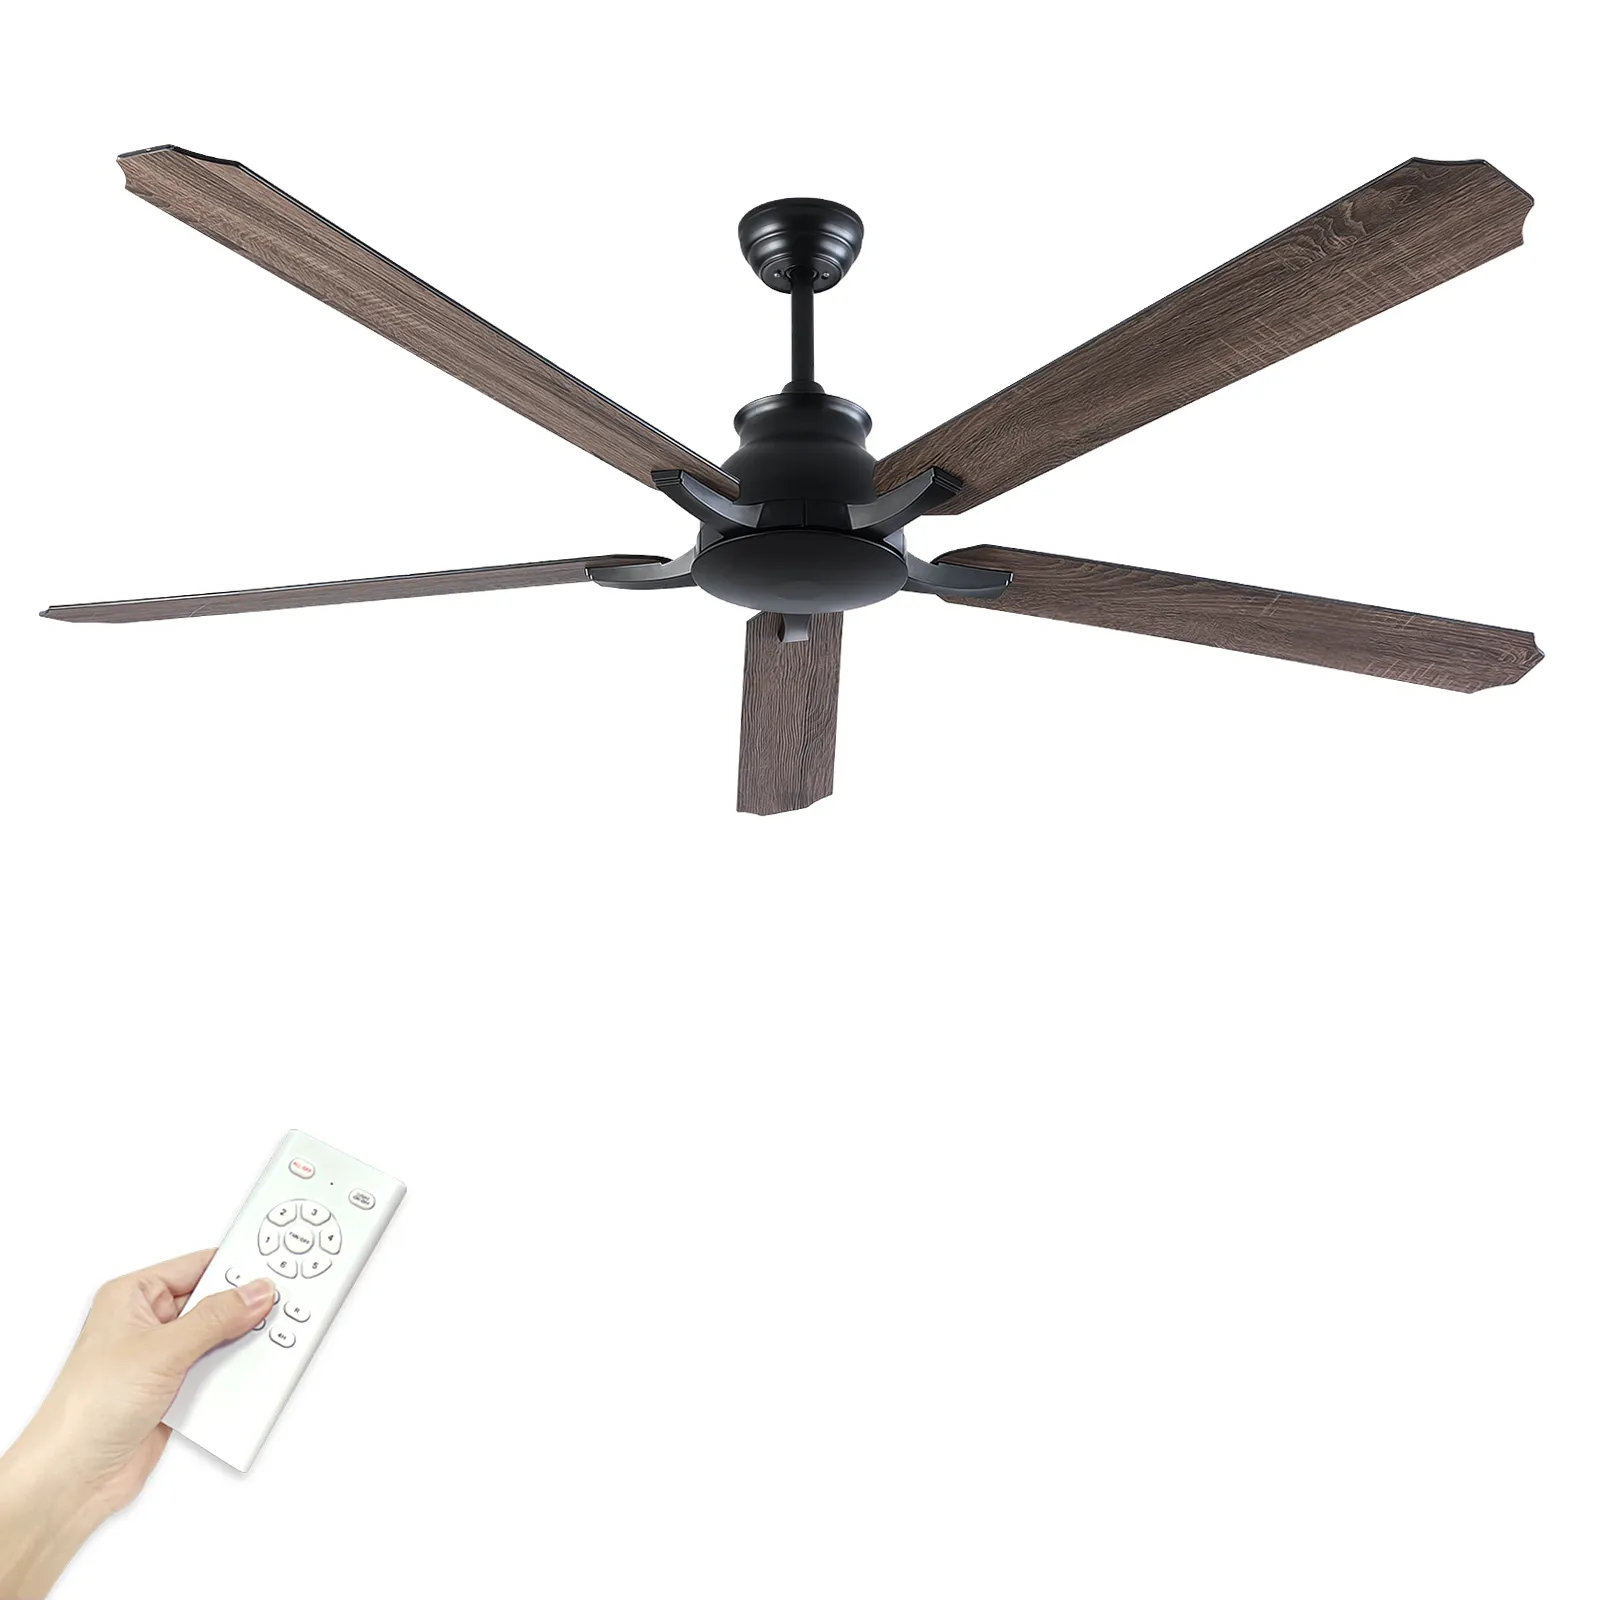 Amazon Bestseller 72 inch Electric Fan with DC Silent Motor Large 5 Blade for Home or Office Industrial Ceiling Fan